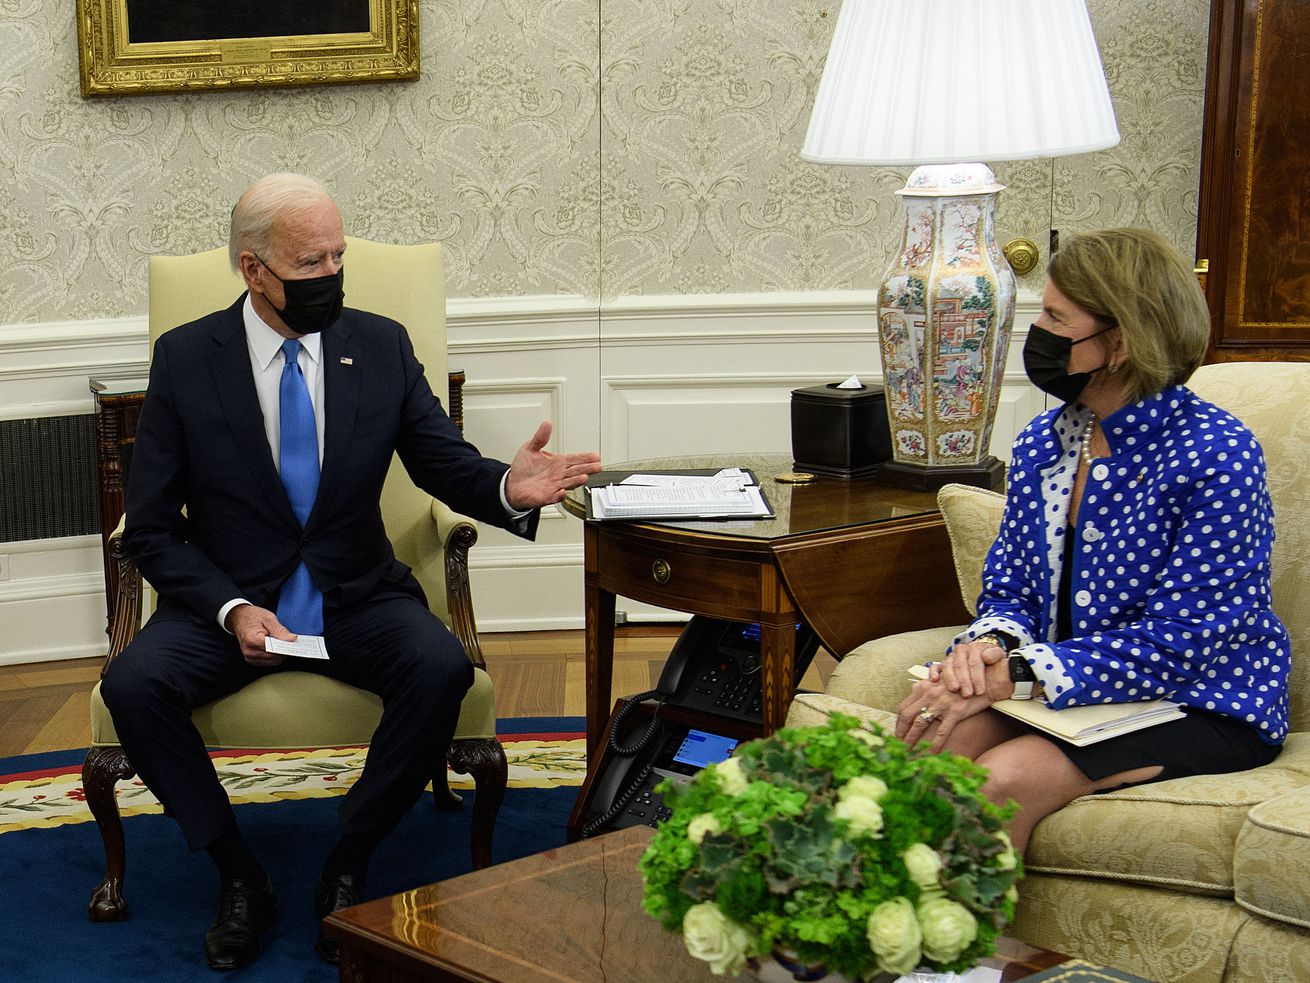 Biden’s negotiations with Republicans are making some Democrats anxious